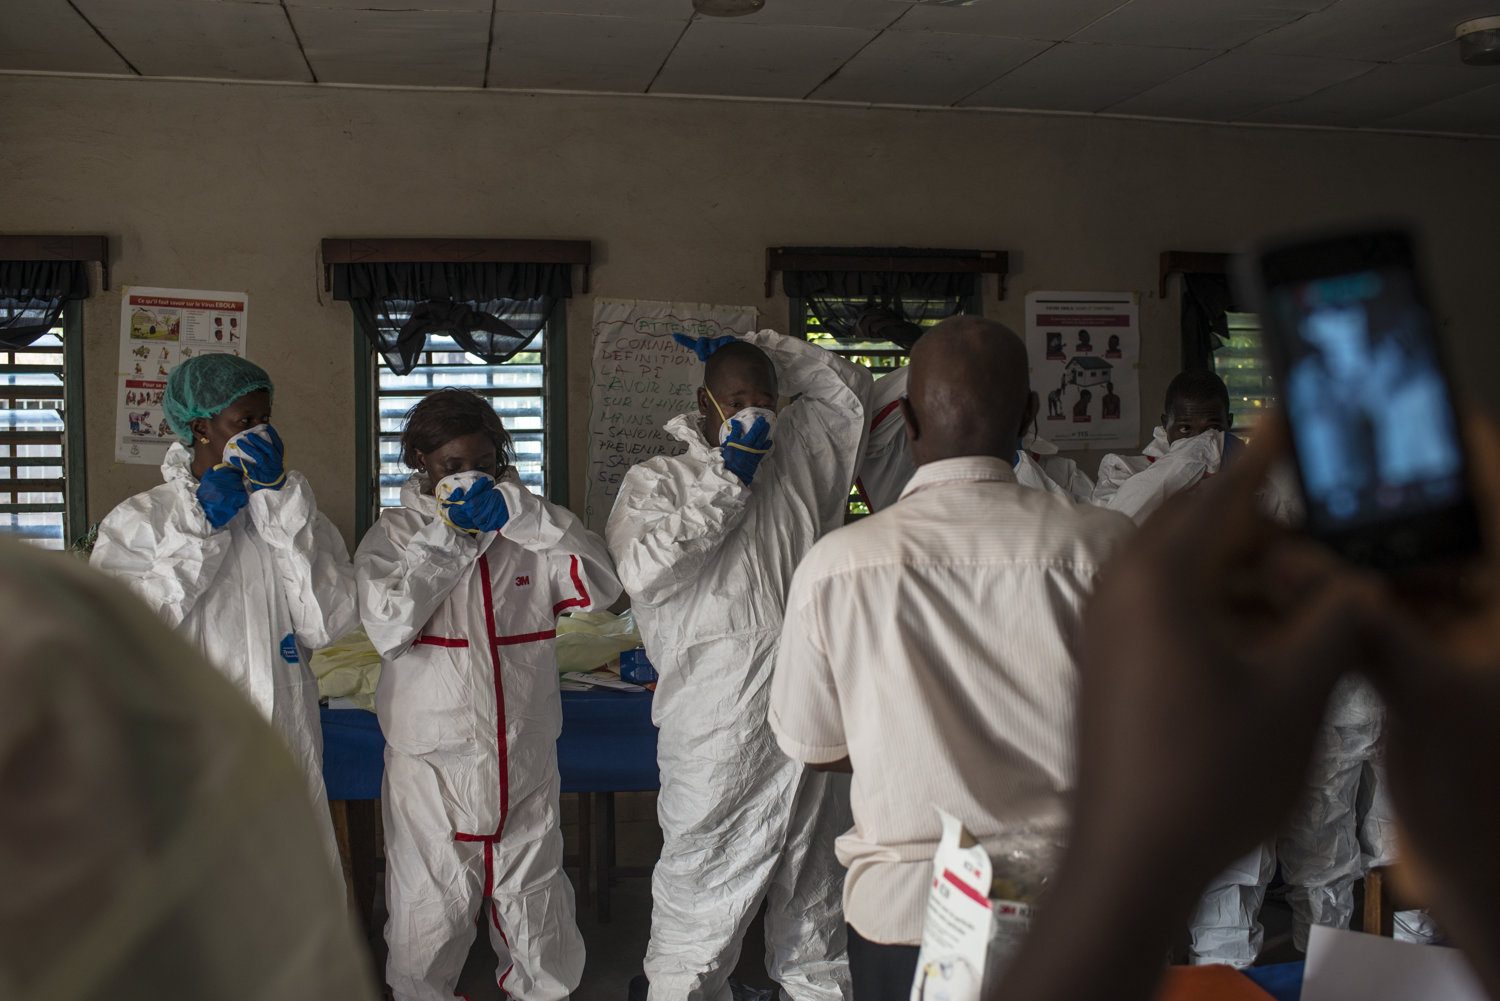  At the training students learn the proper way to put on, and take off protective gear without endangering them or the patients,  this session is administered by Dr. Thierno Sadou.
 